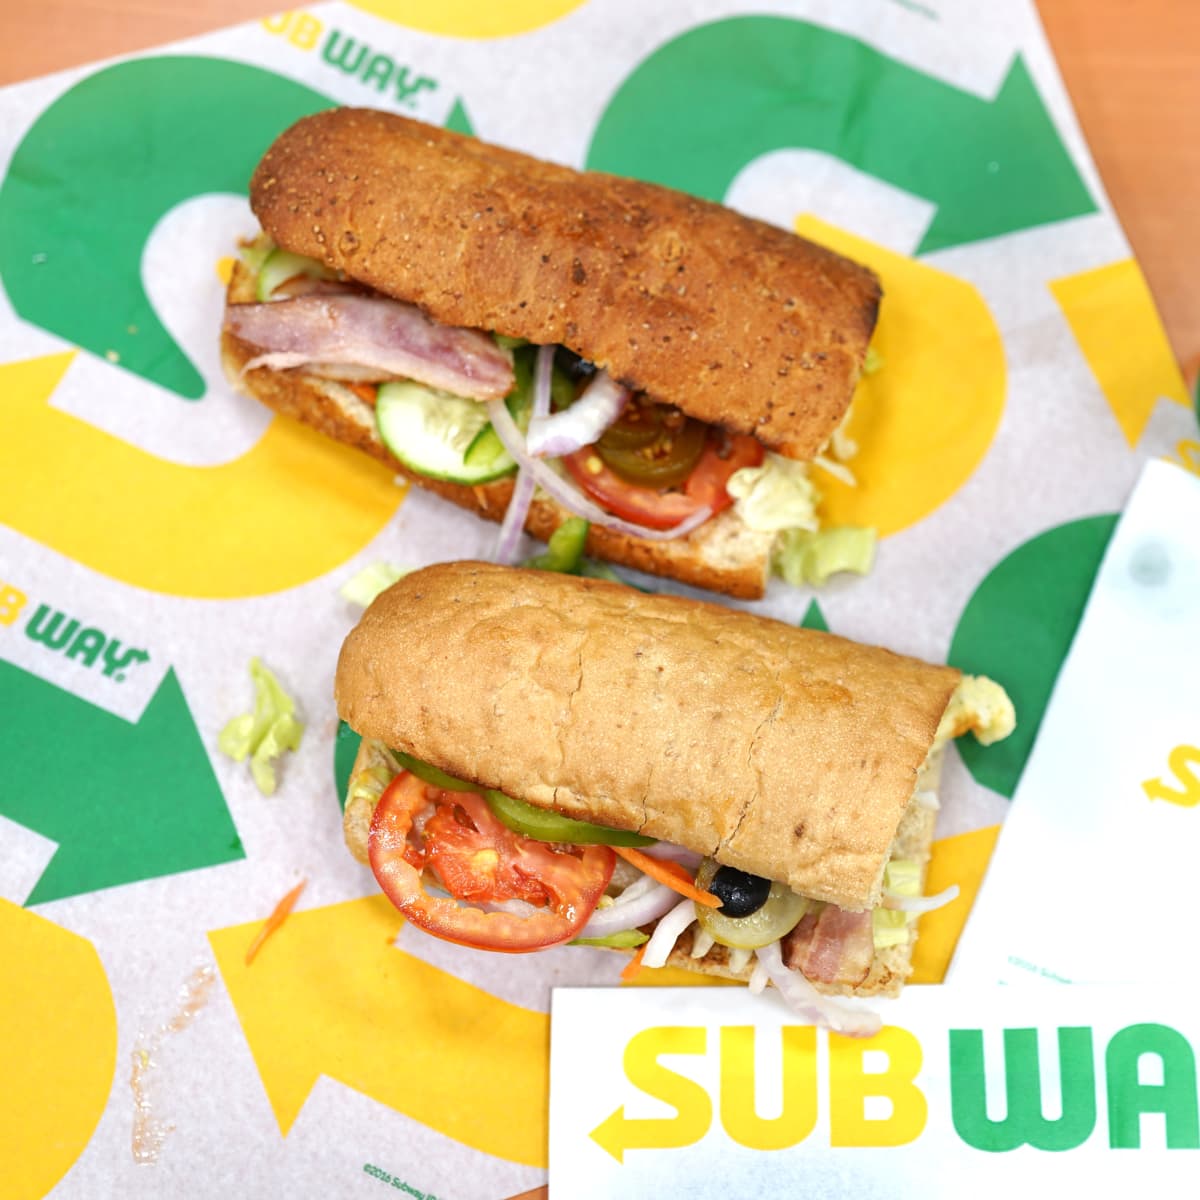 Subway Is Bringing Back These Menu Items After Angry Complaints